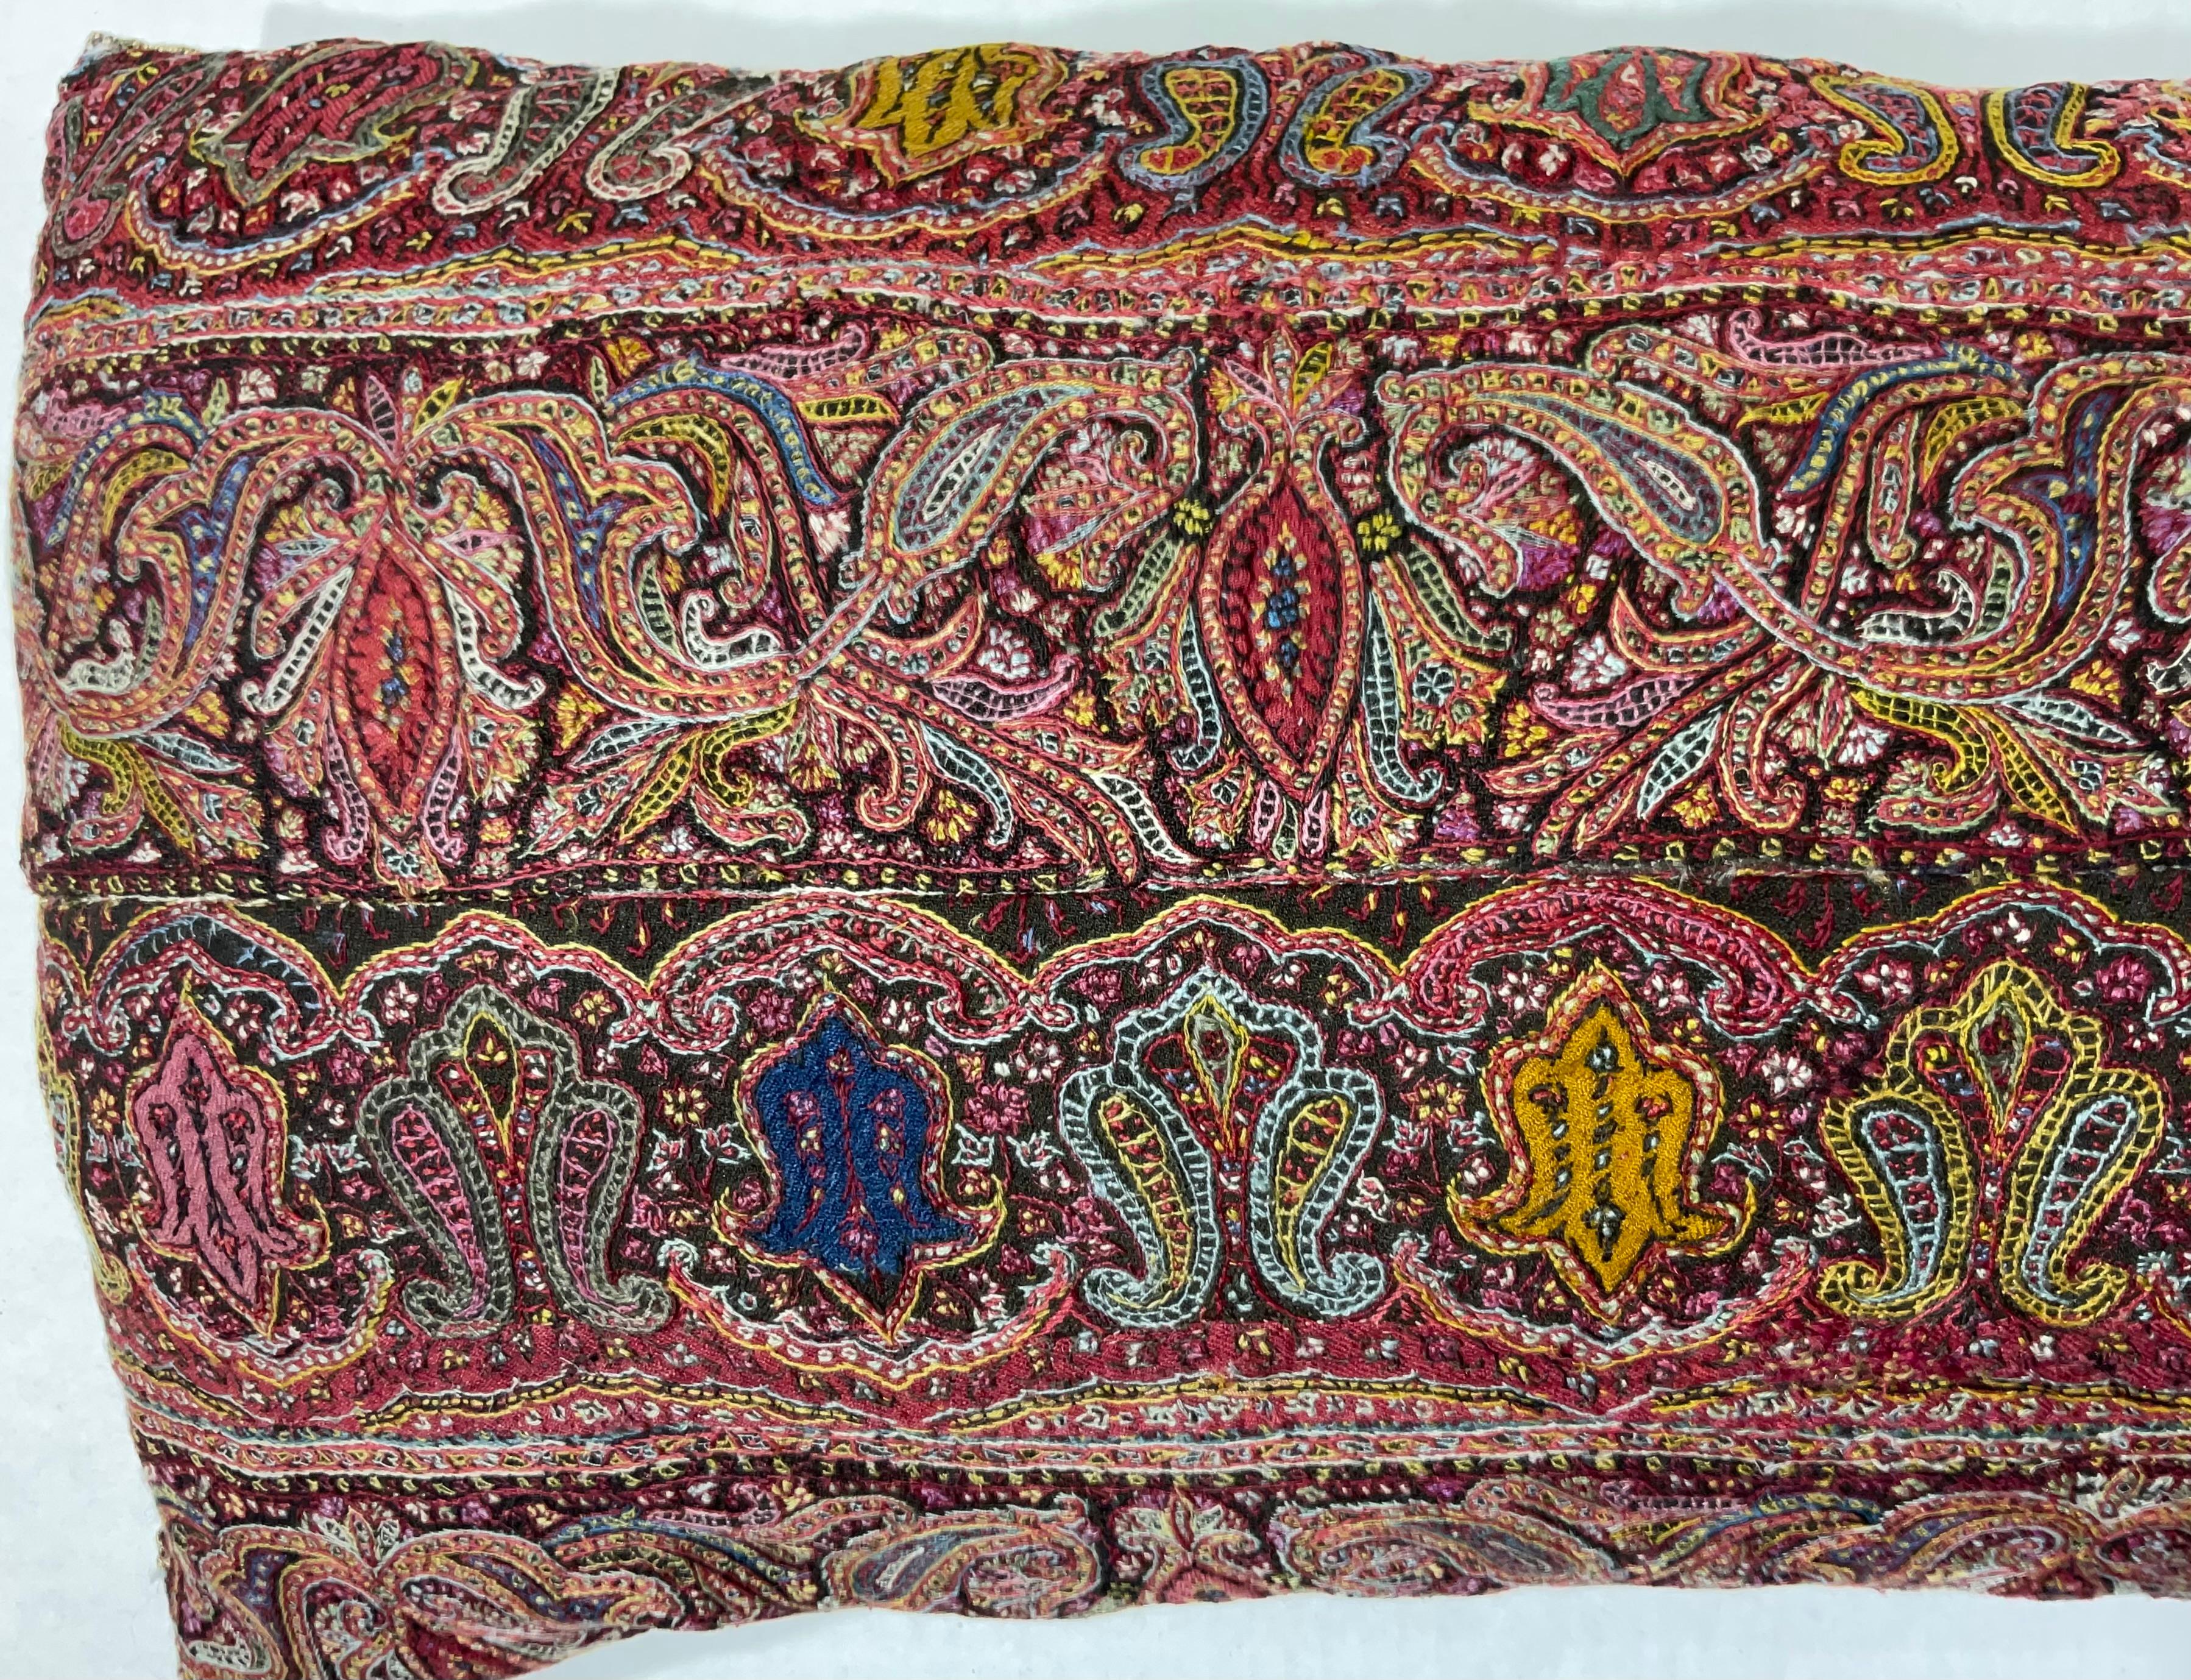 Wool Single Hand Embroidery Persian Suzani Pillow For Sale